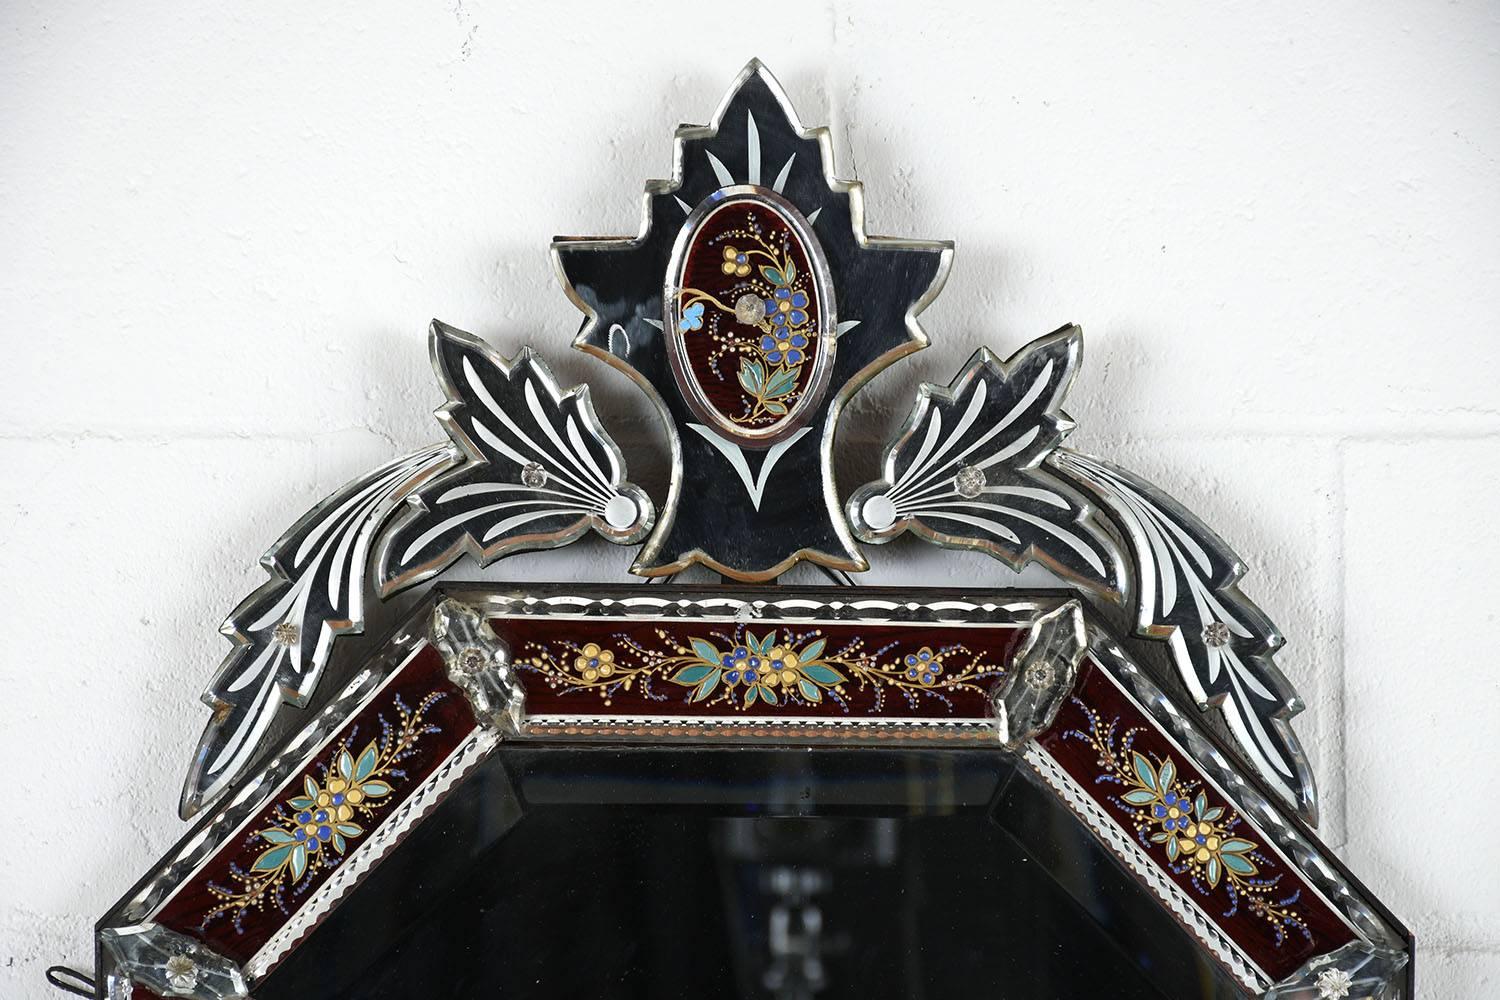 This 1890s Italian Venetian-style mirror features a Murano glass and mirror frame. The decorative frame has a leaf shaped crest with etched details and raised glass accents. Adorning the frame is raised enamel and gold color paint floral and leaf